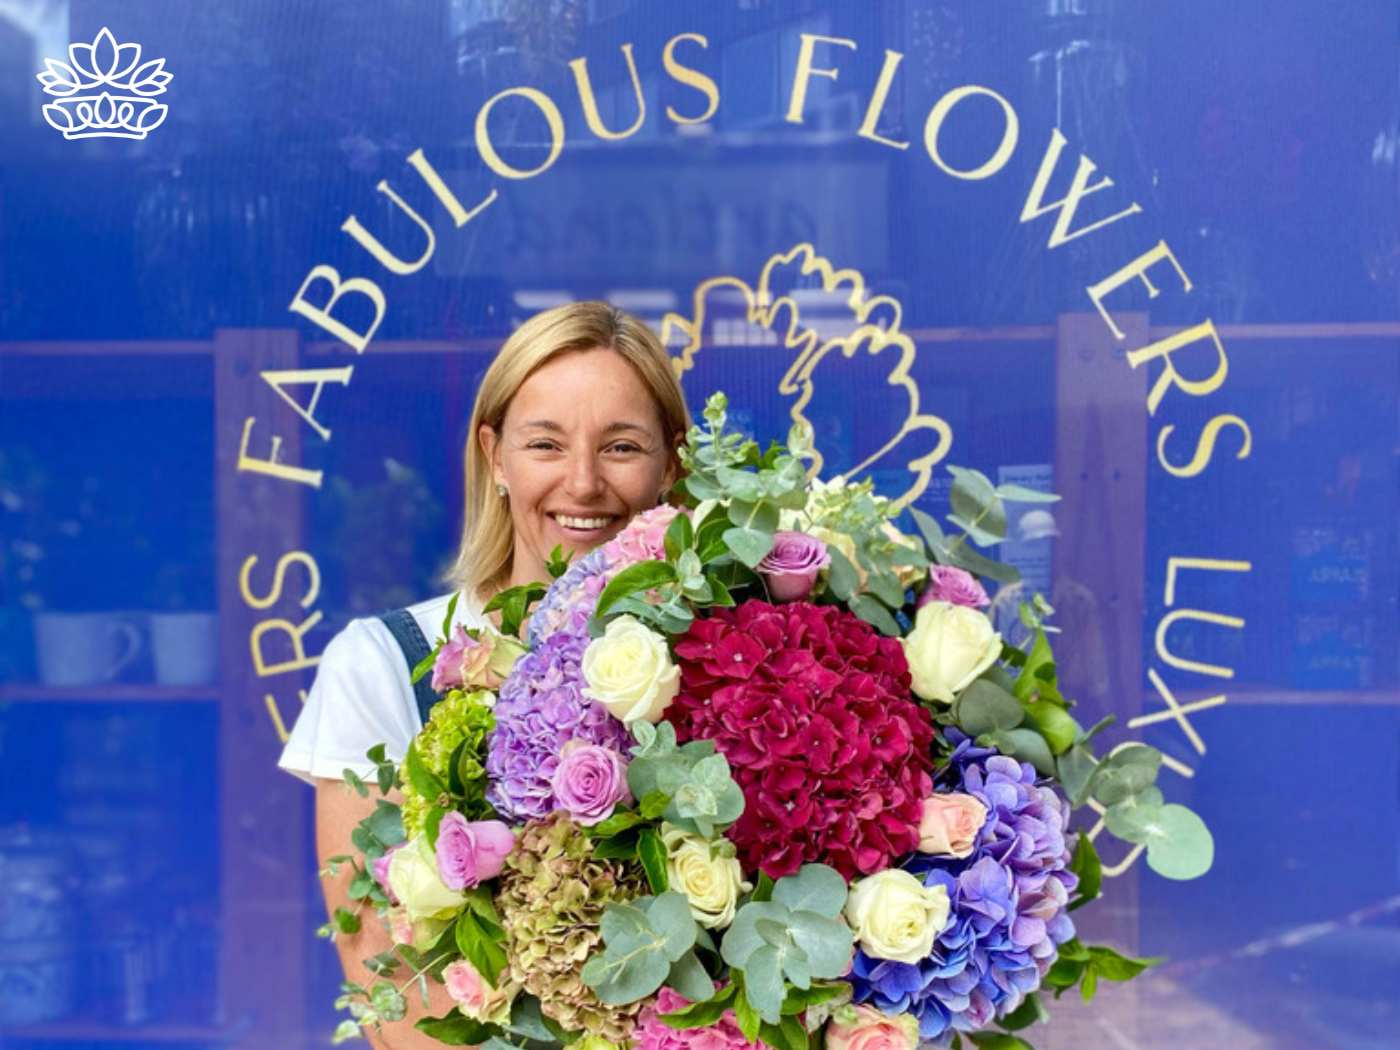 A smiling woman presenting a large and luxurious bouquet s.